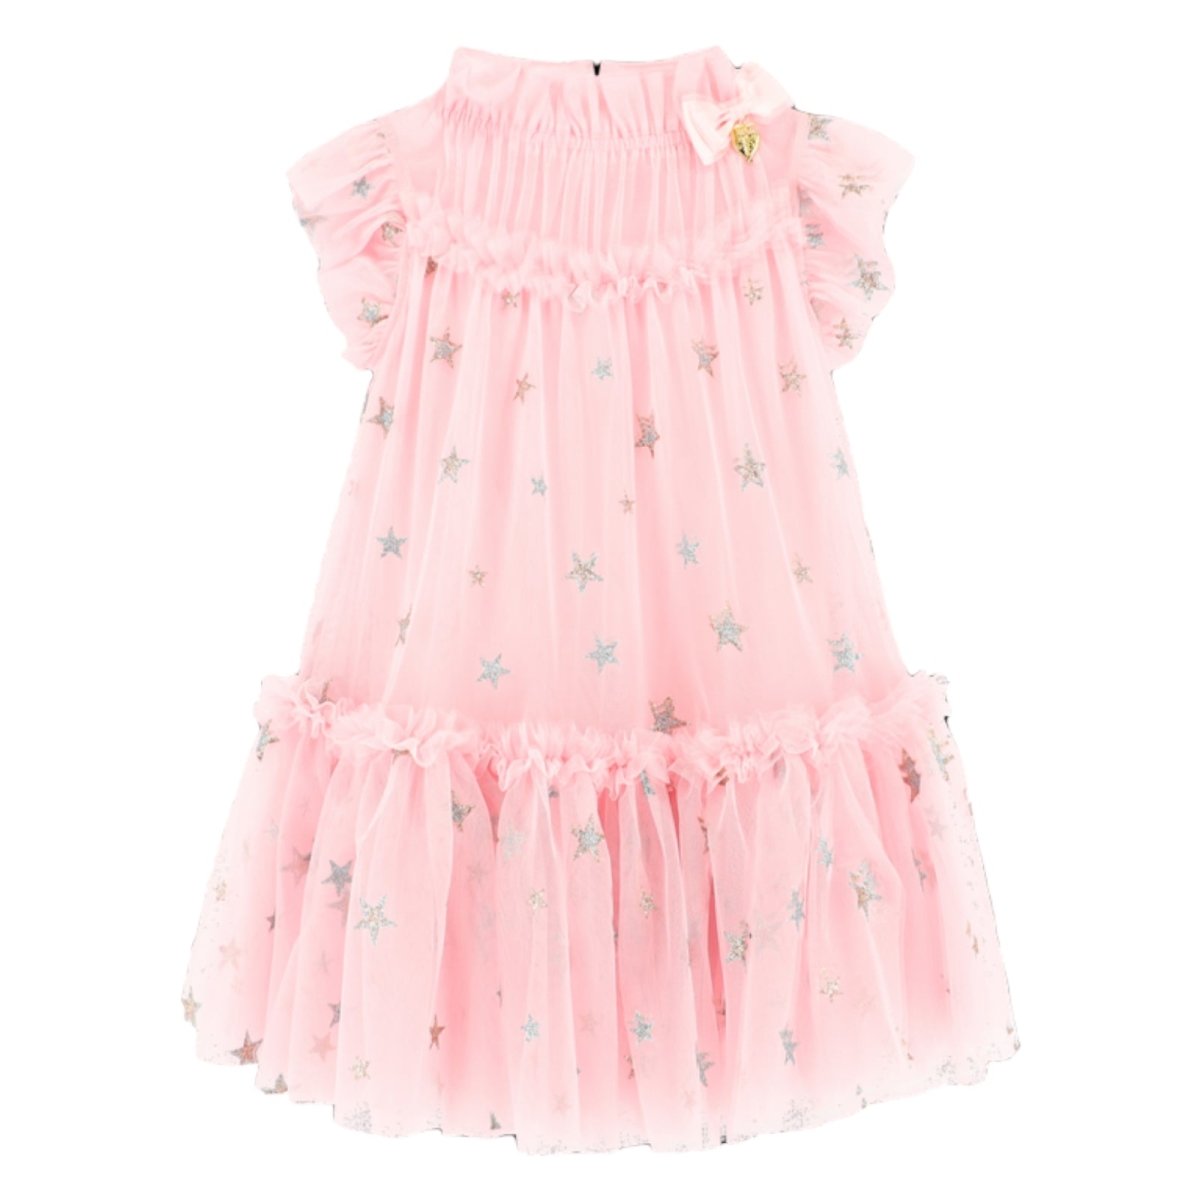 MARIGOLD STARS TULLE DRESS (PREORDER) - ANGEL'S FACE